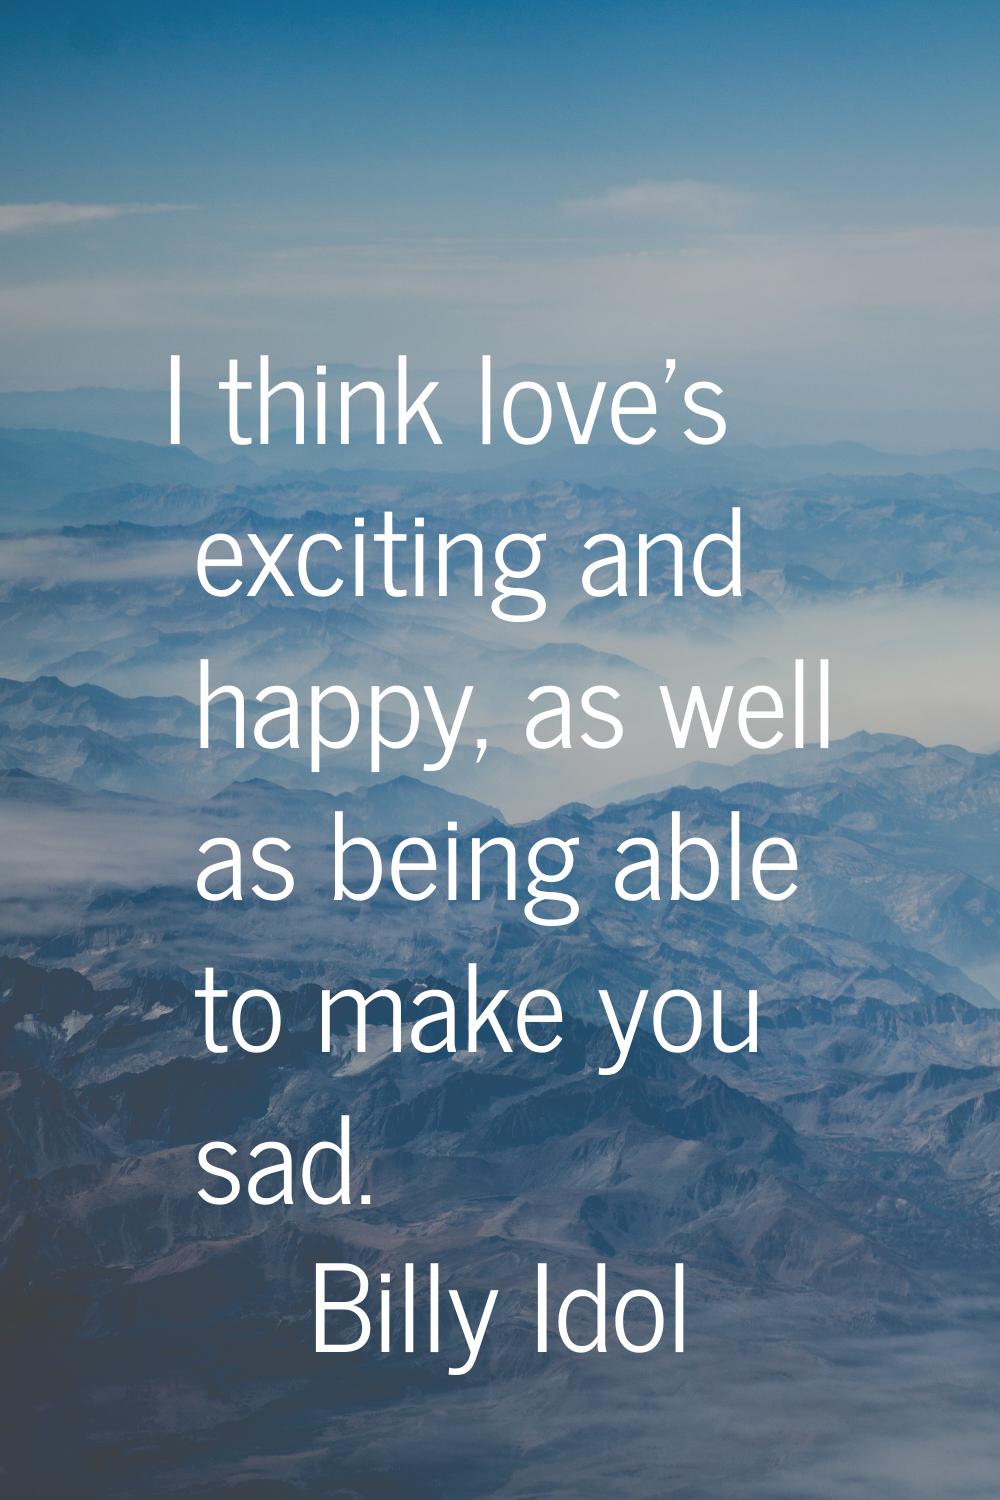 I think love's exciting and happy, as well as being able to make you sad.